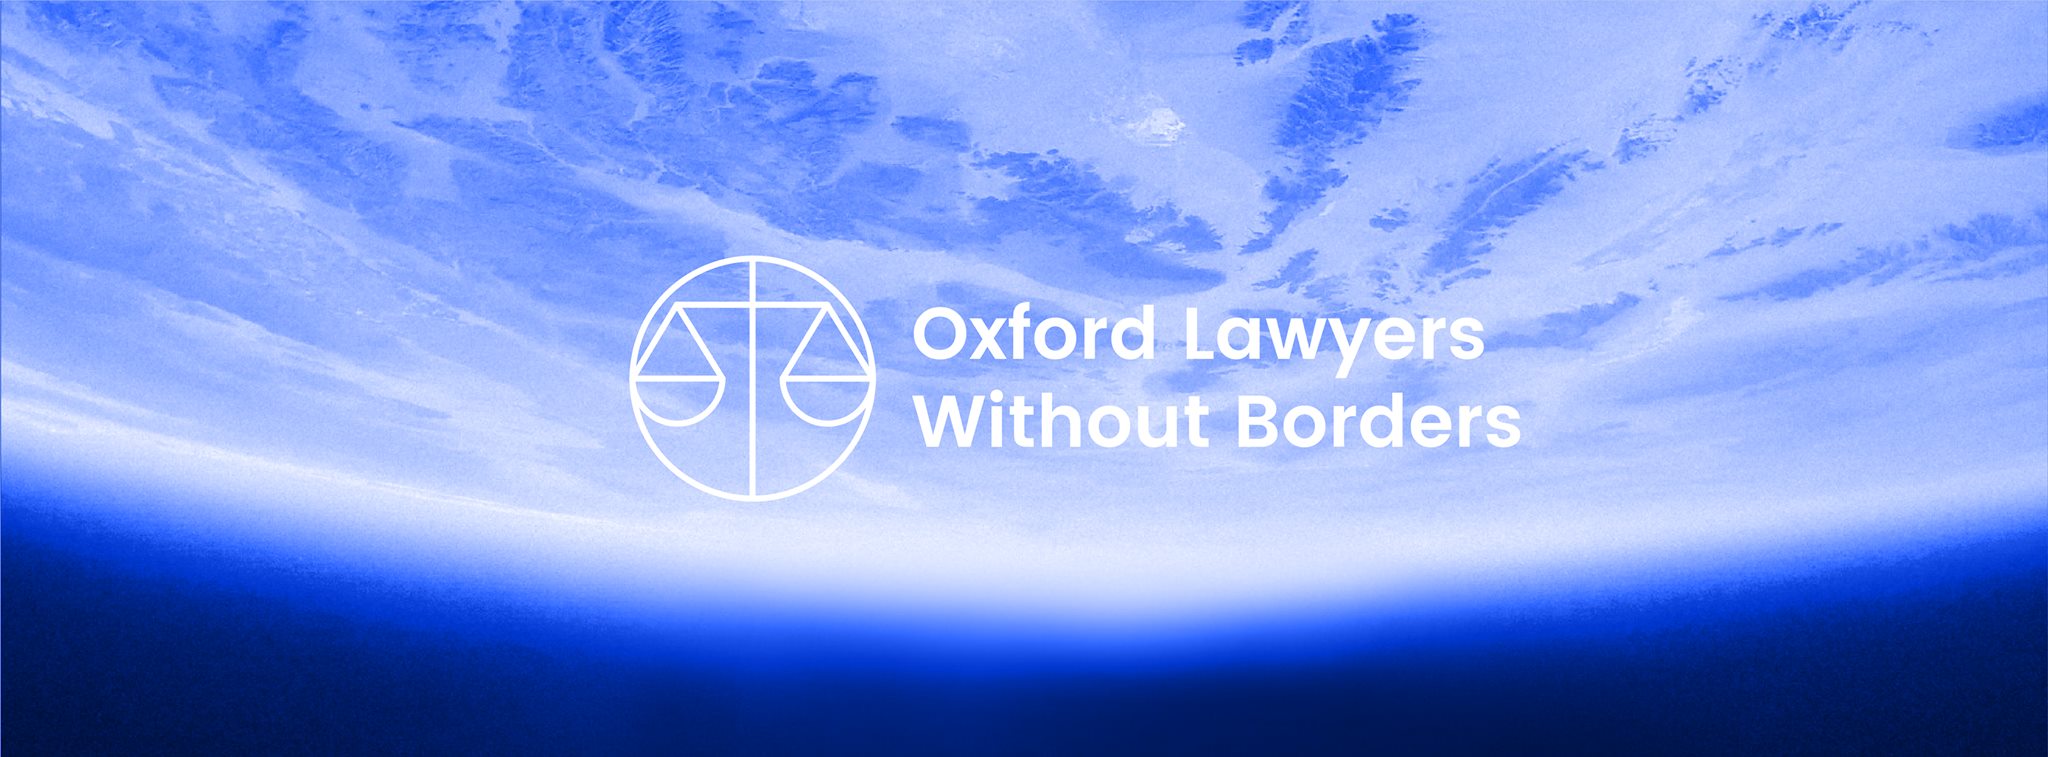 Oxford Lawyers Without Borders logo